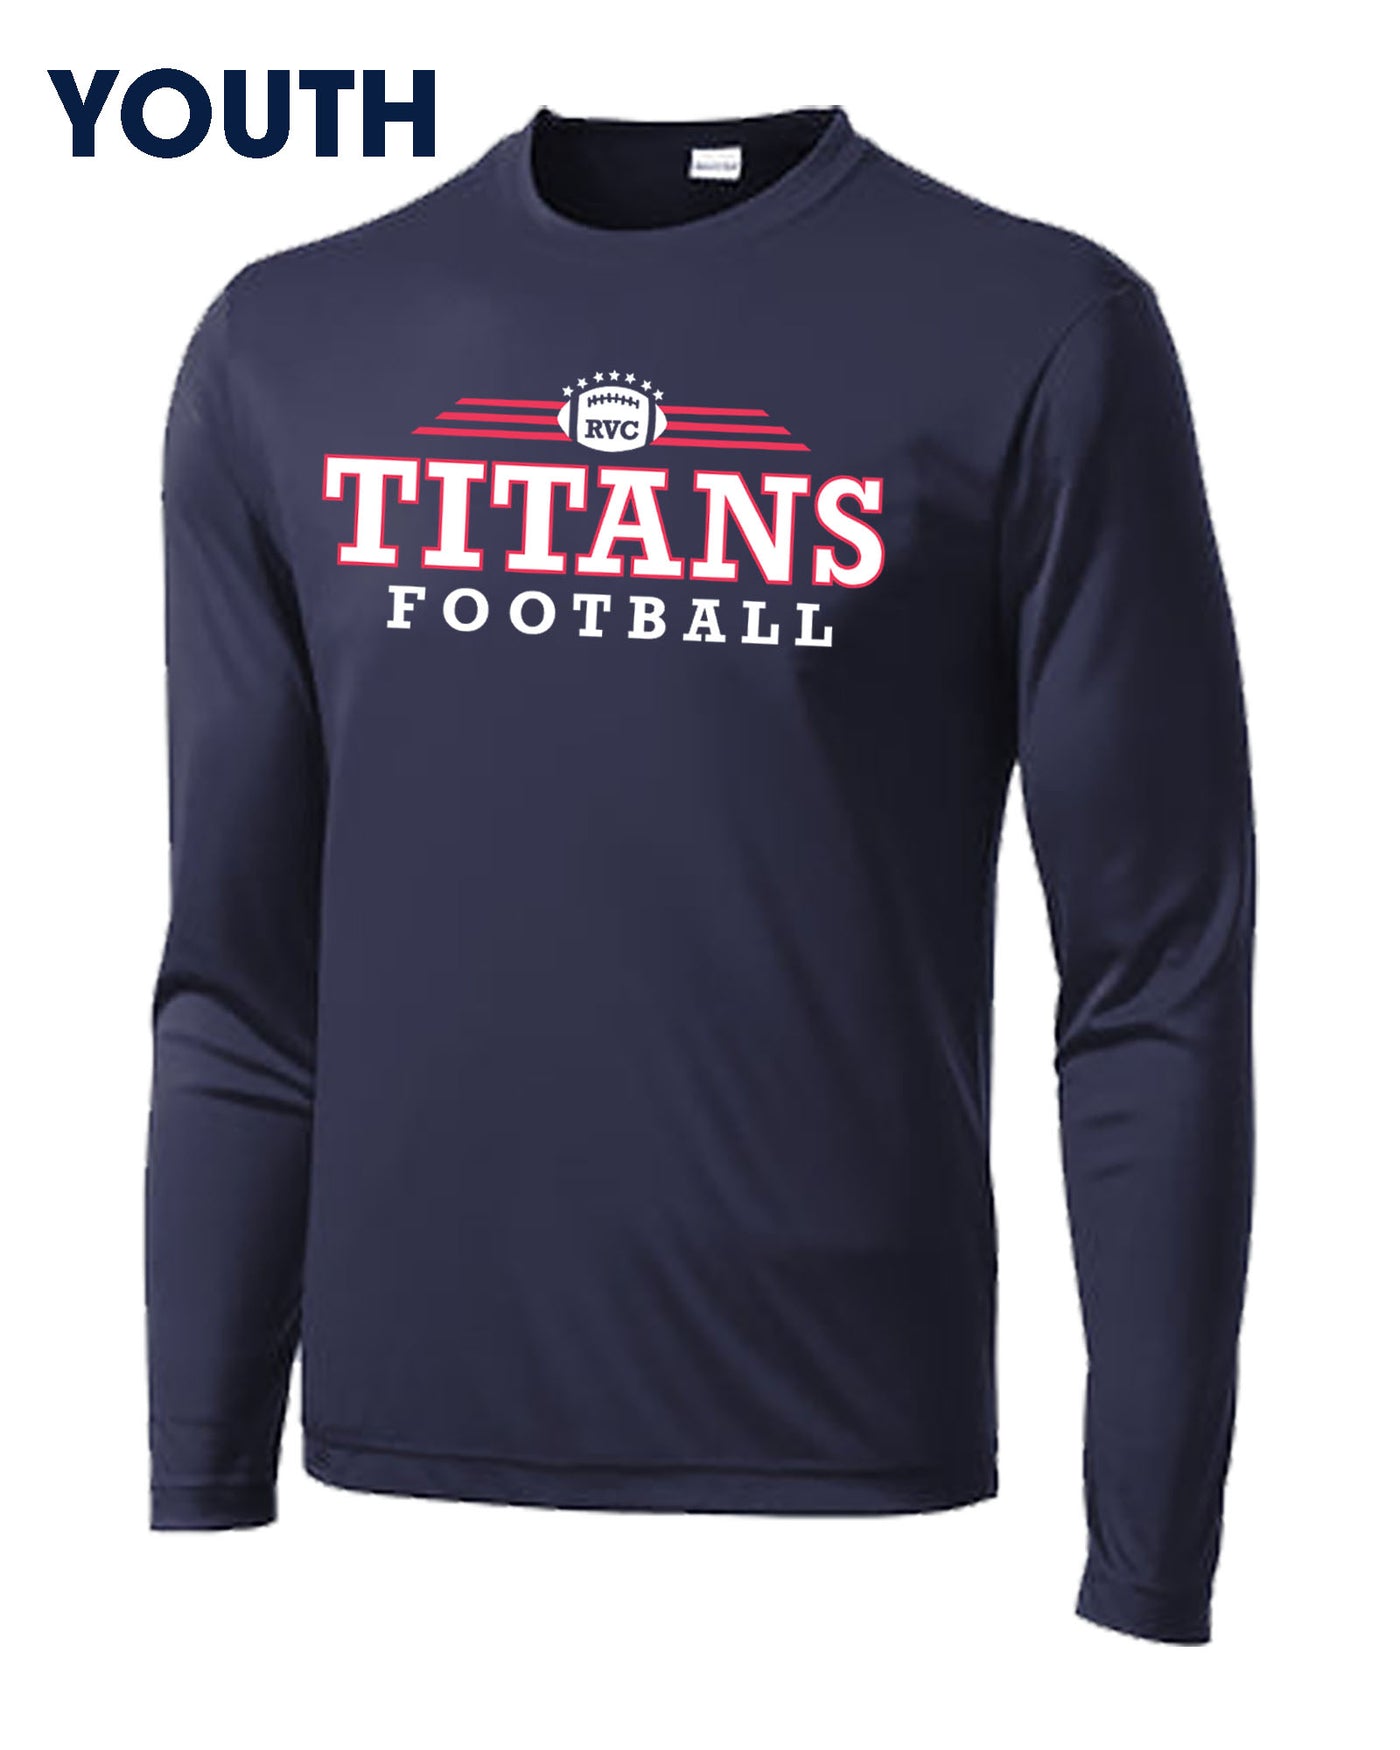 YOUTH Titans Gameday Long Sleeve Moisture Wicking Performance T Shirt